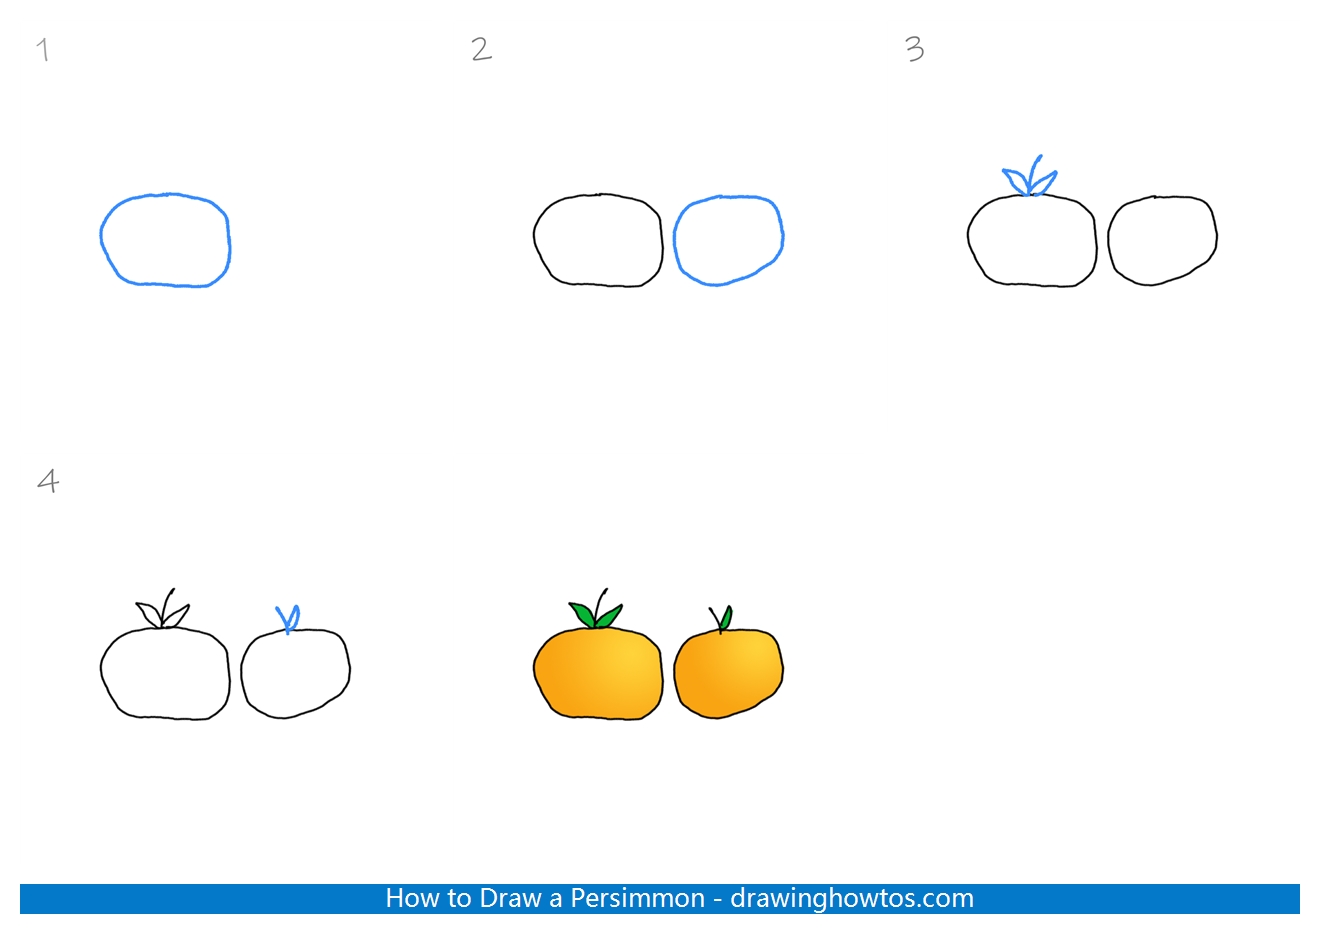 How to Draw a Persimmon step by step